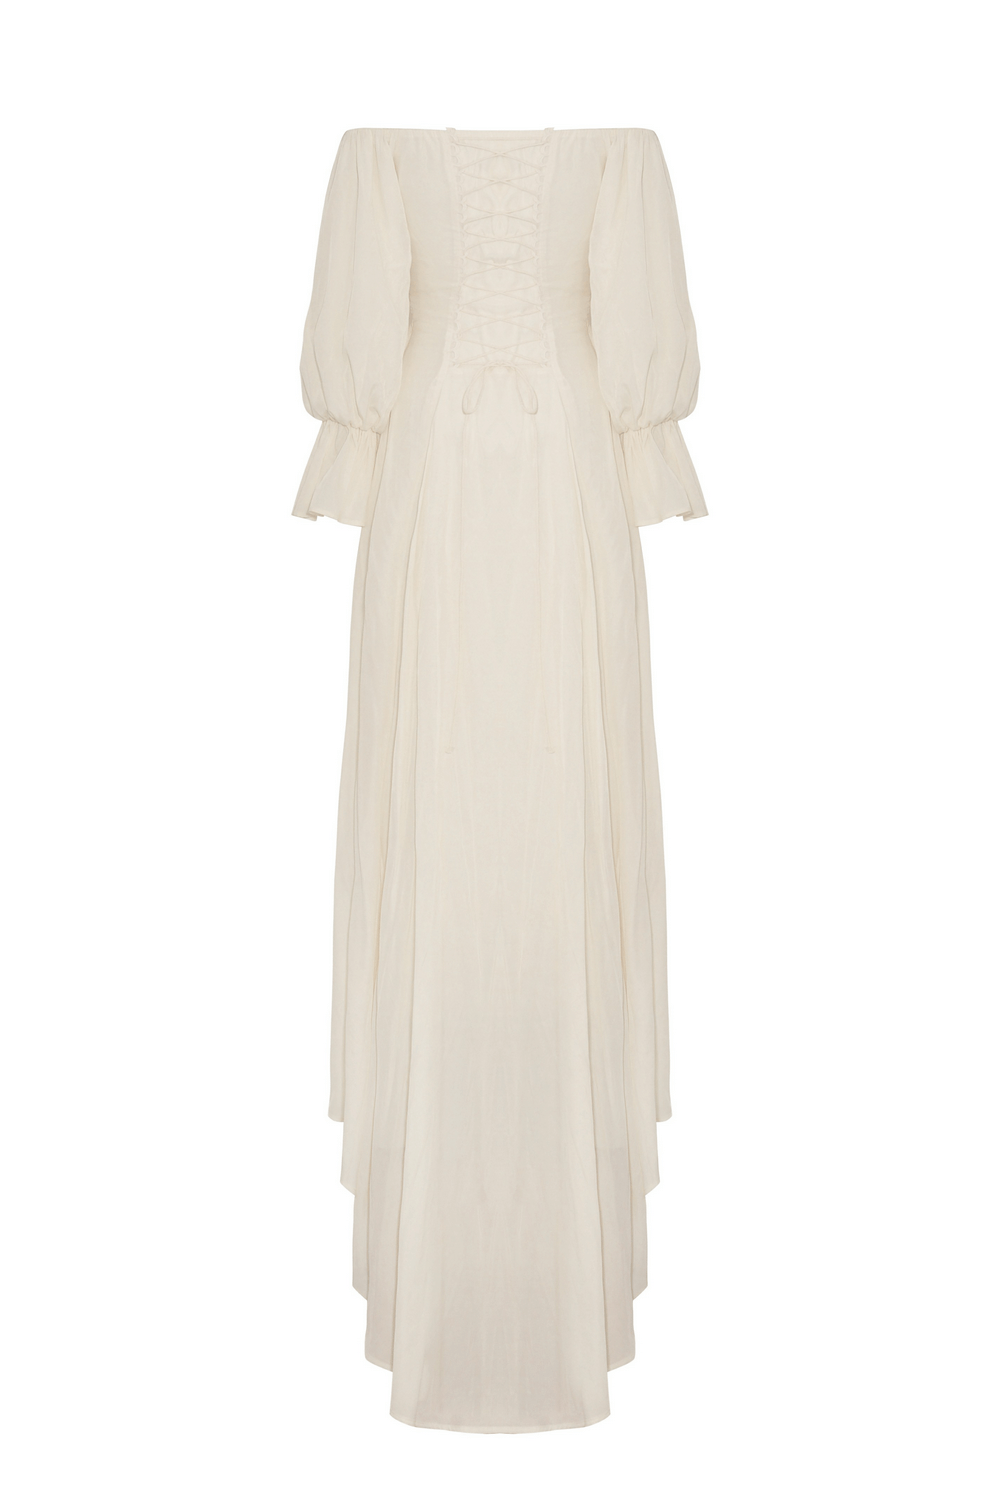 Elegant Vintage Long Sleeves Maxi Dress with Lace Detail